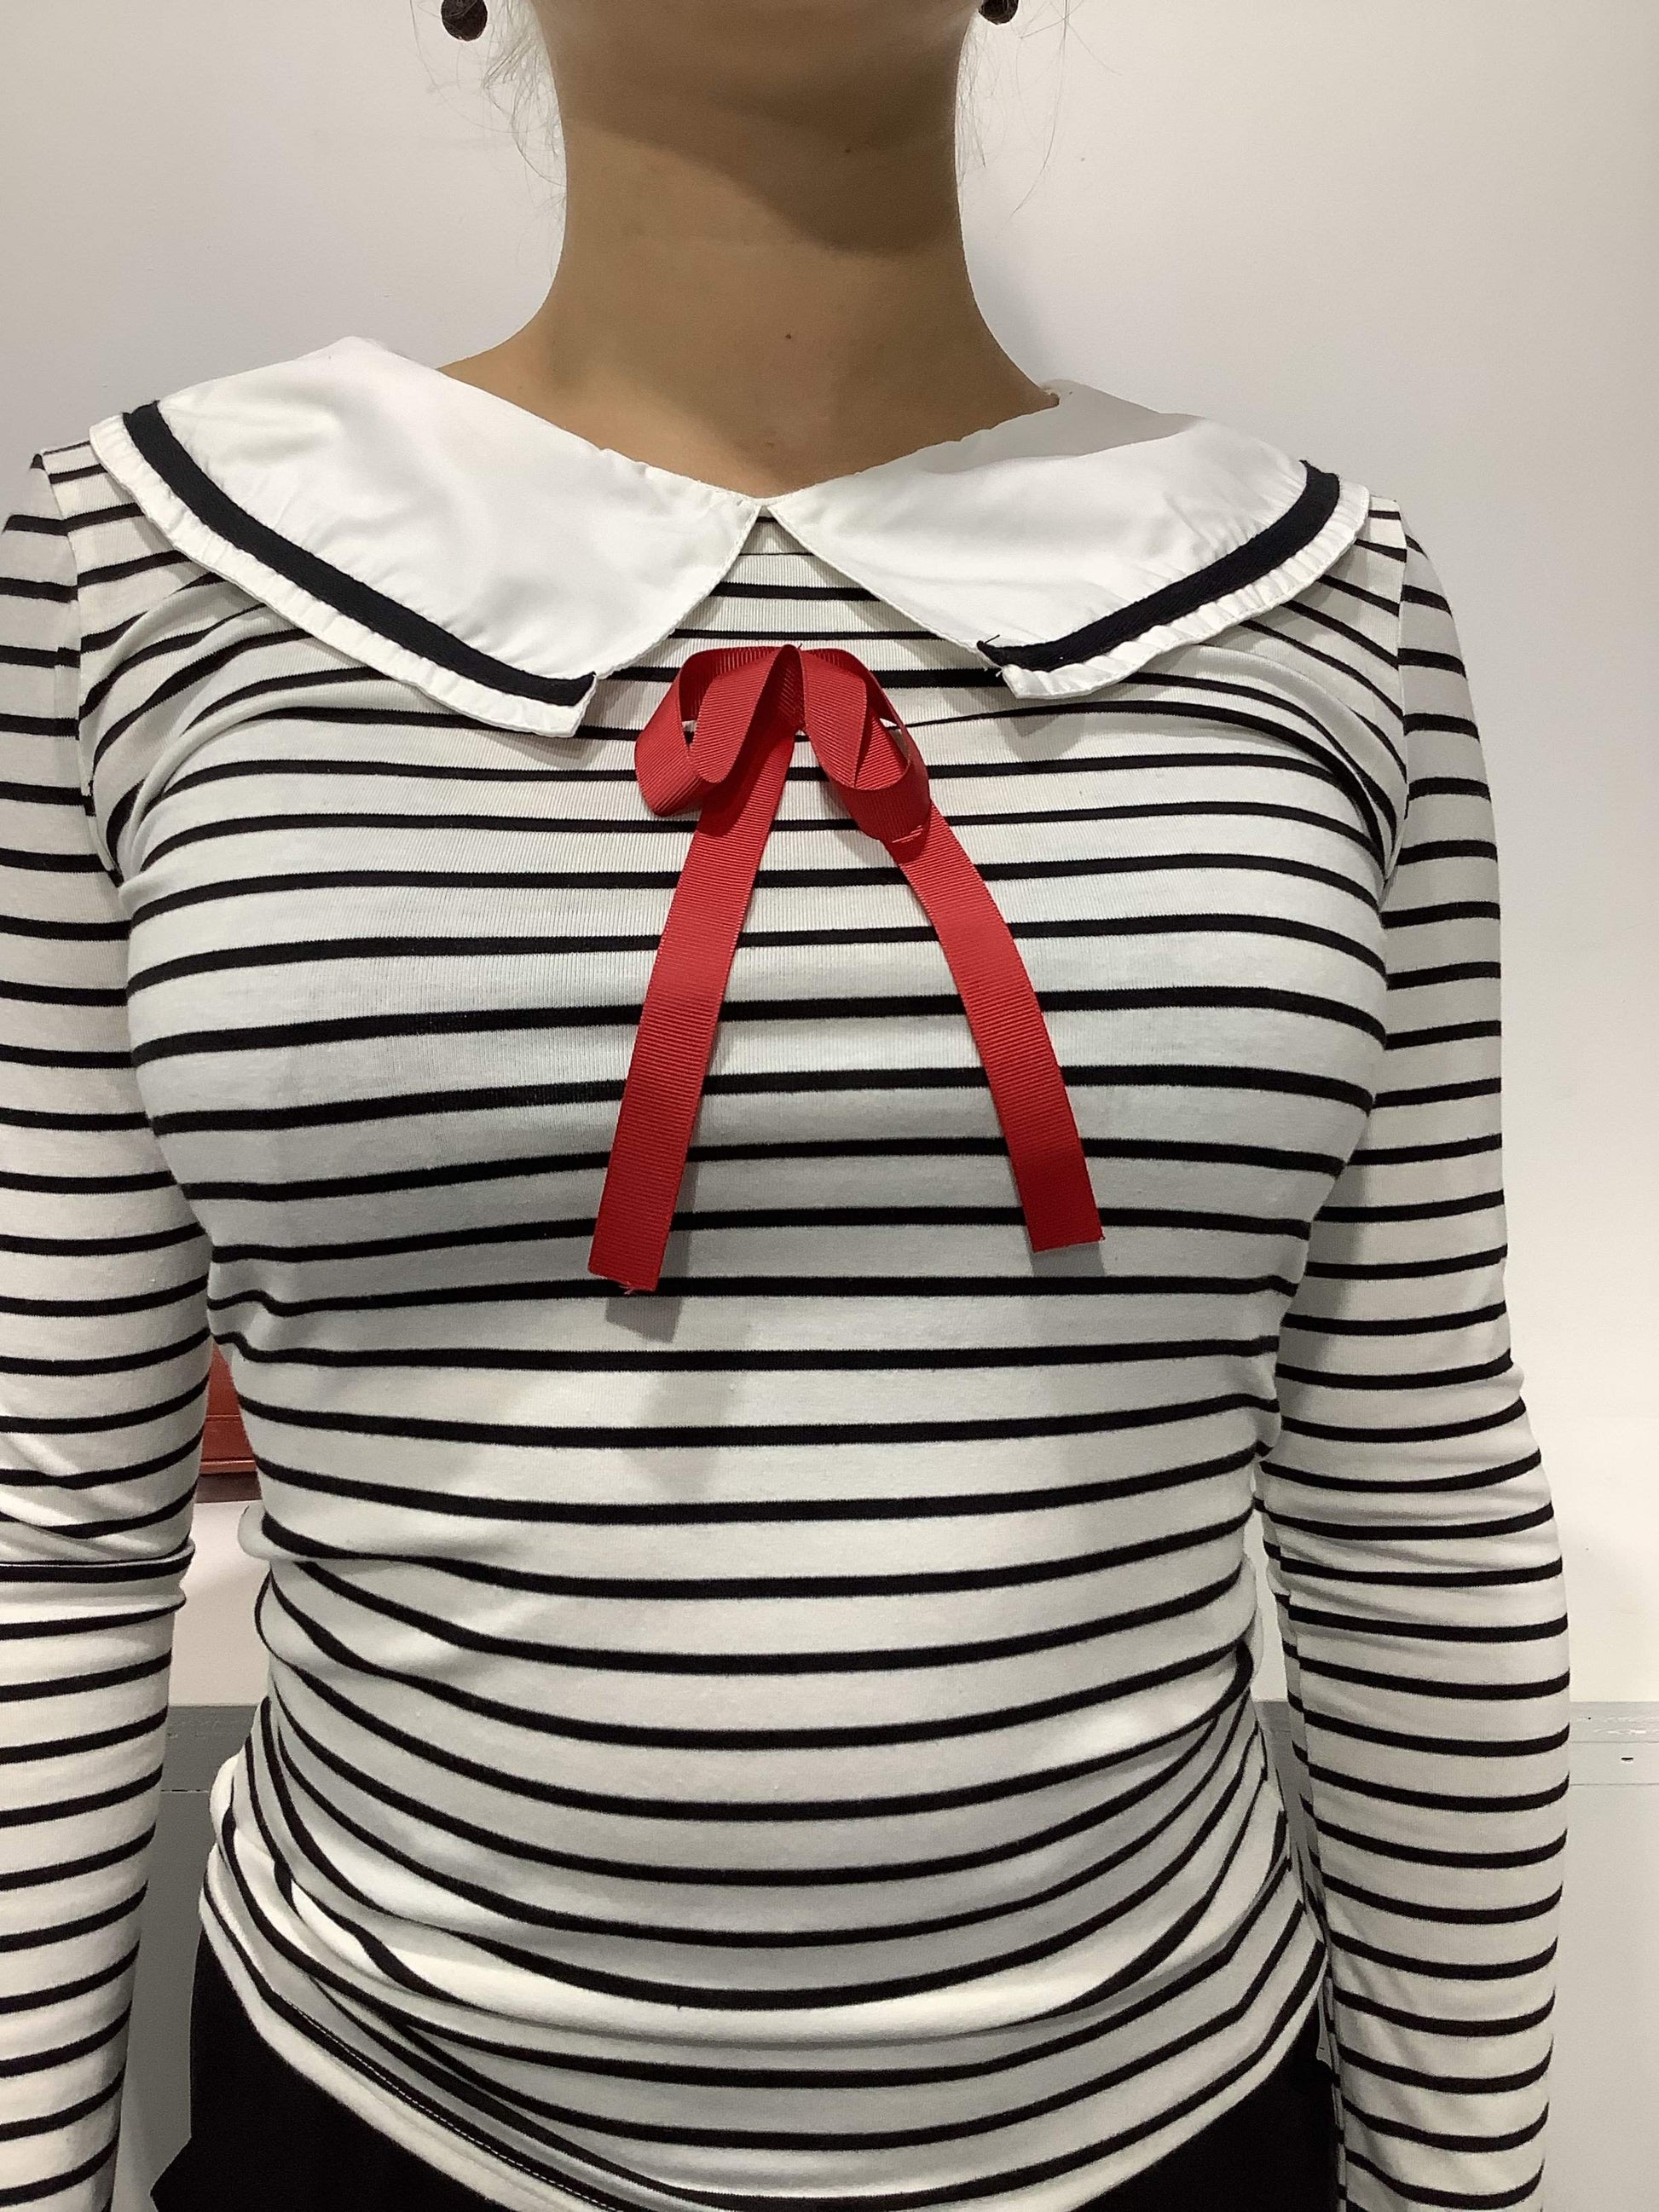 STRIPED TOP-Bitter and Better-fashion,gestreept,gestreepte top,matrozen kraag,streep,striped,striped top,sustainable,vintage,zwart wit,zwart witte top